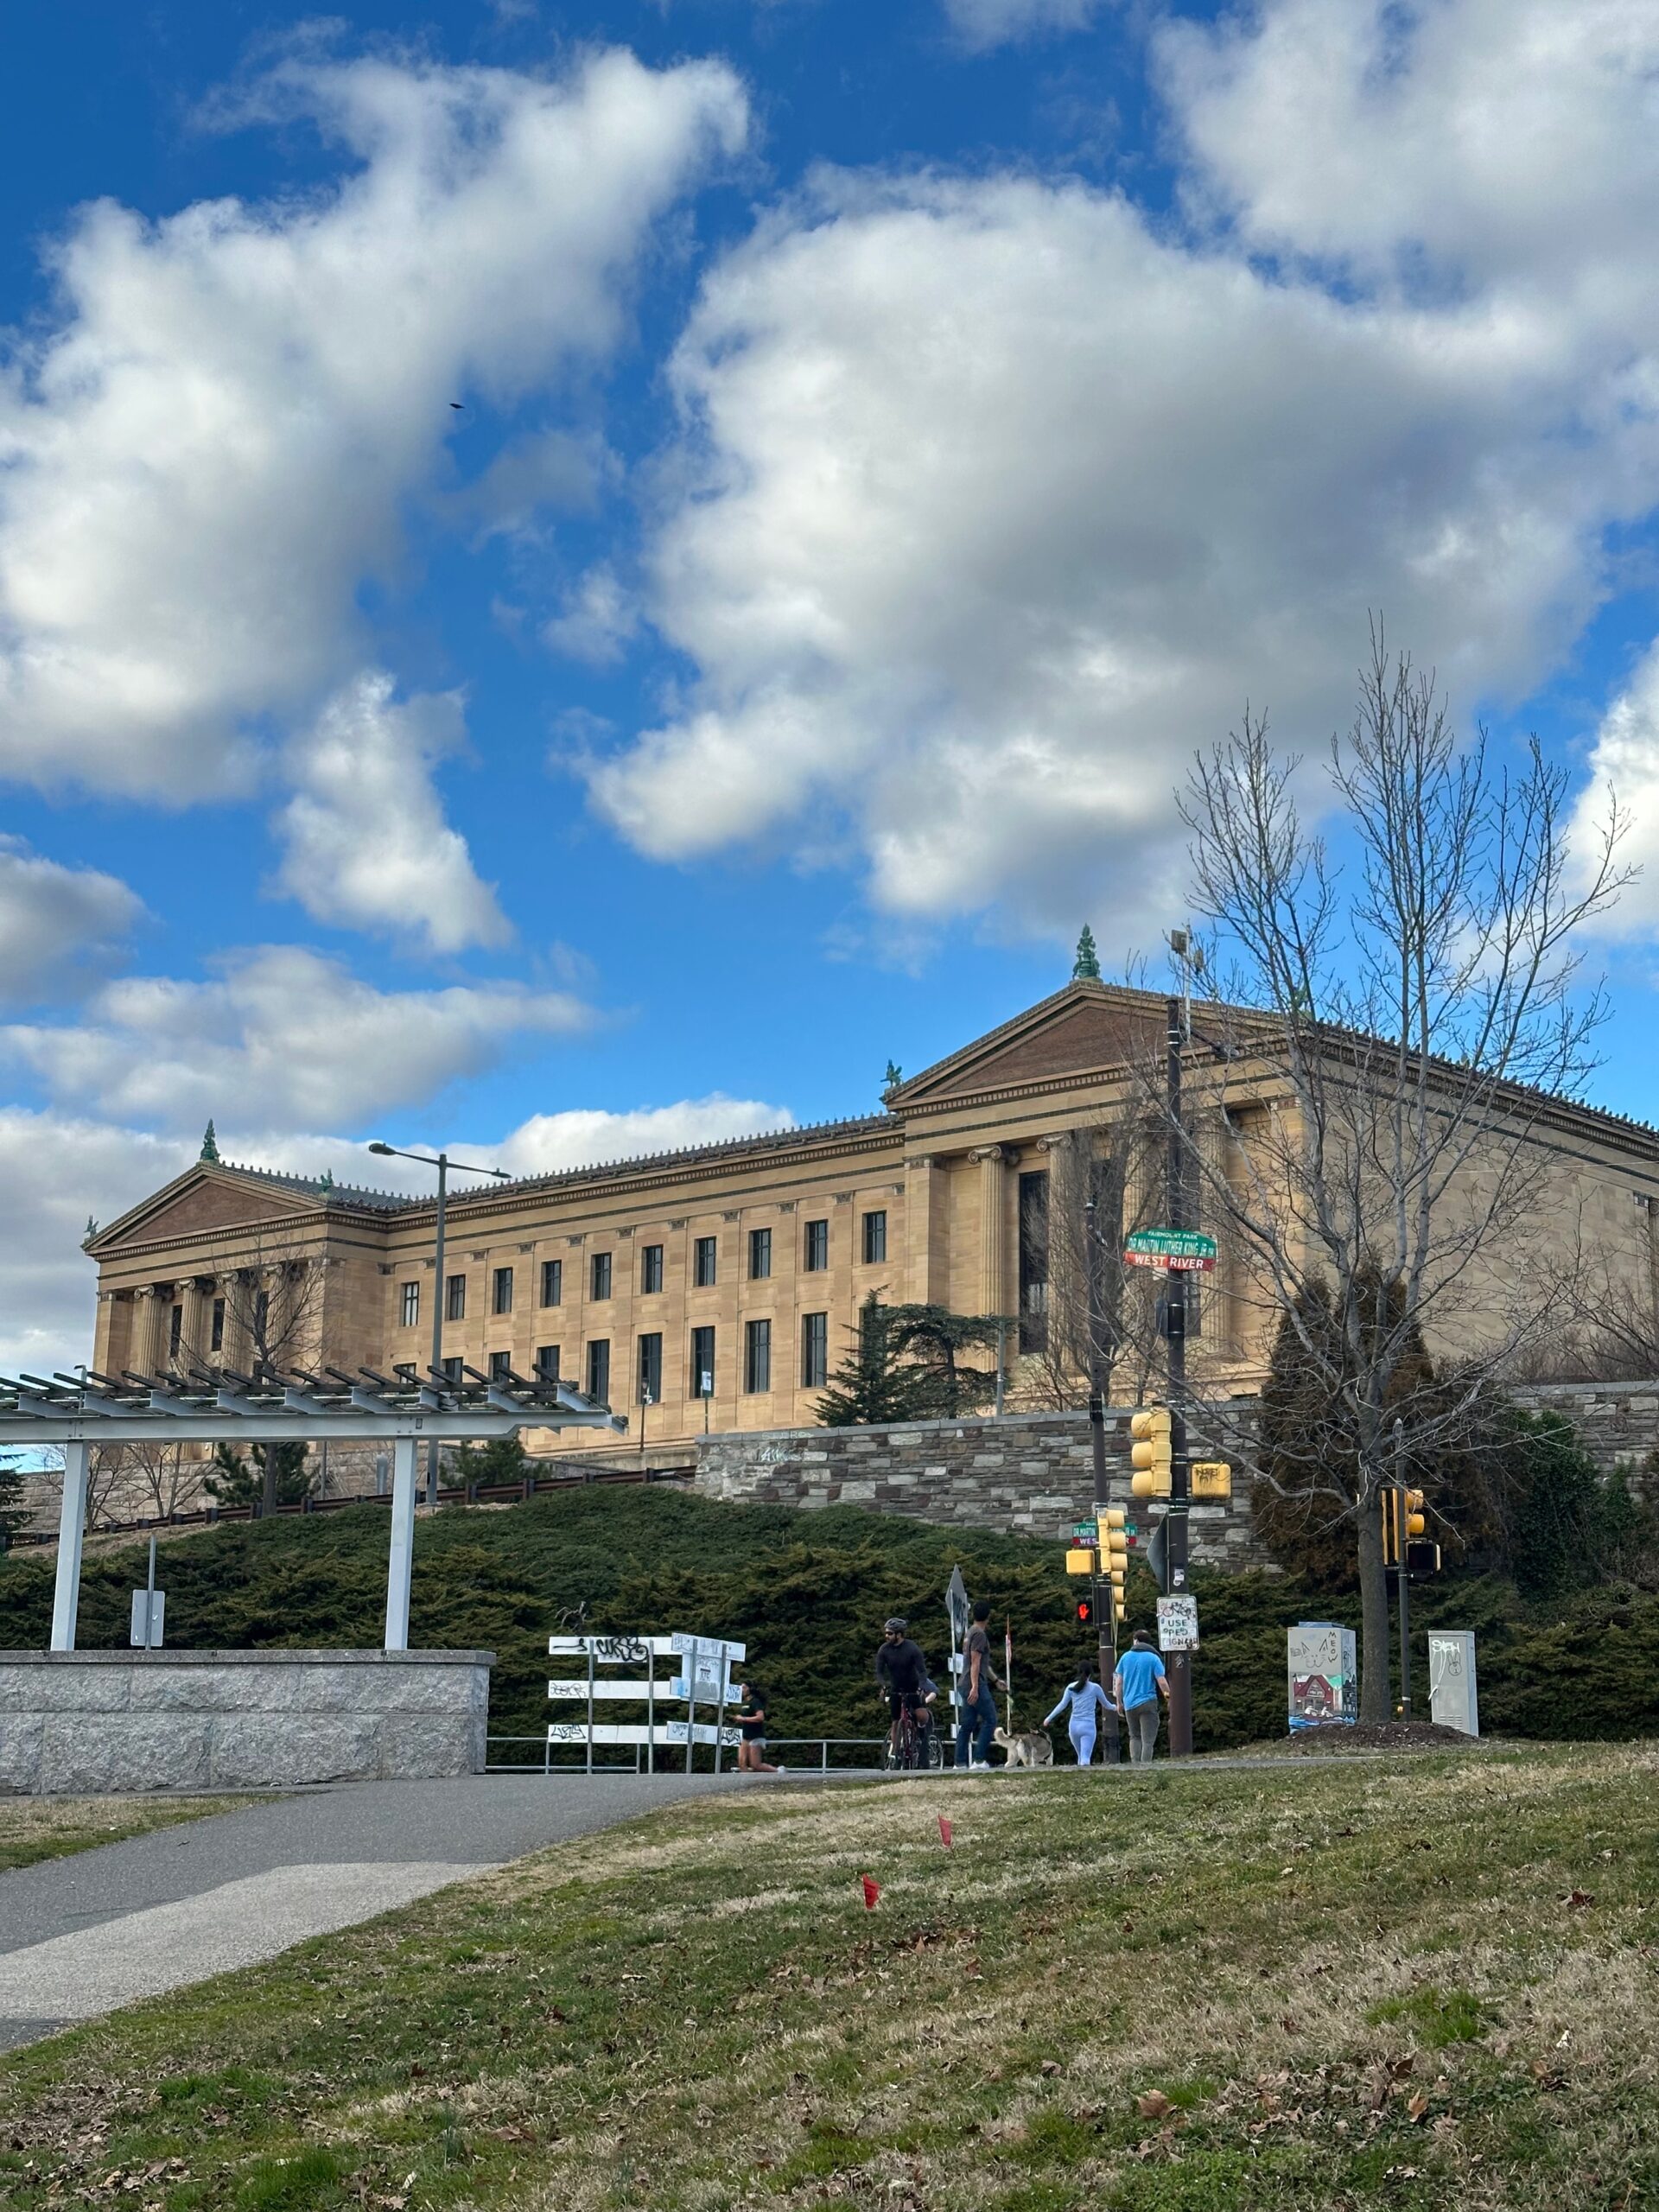 Exterior of the Philadelphia Art Museum on a sunny day.